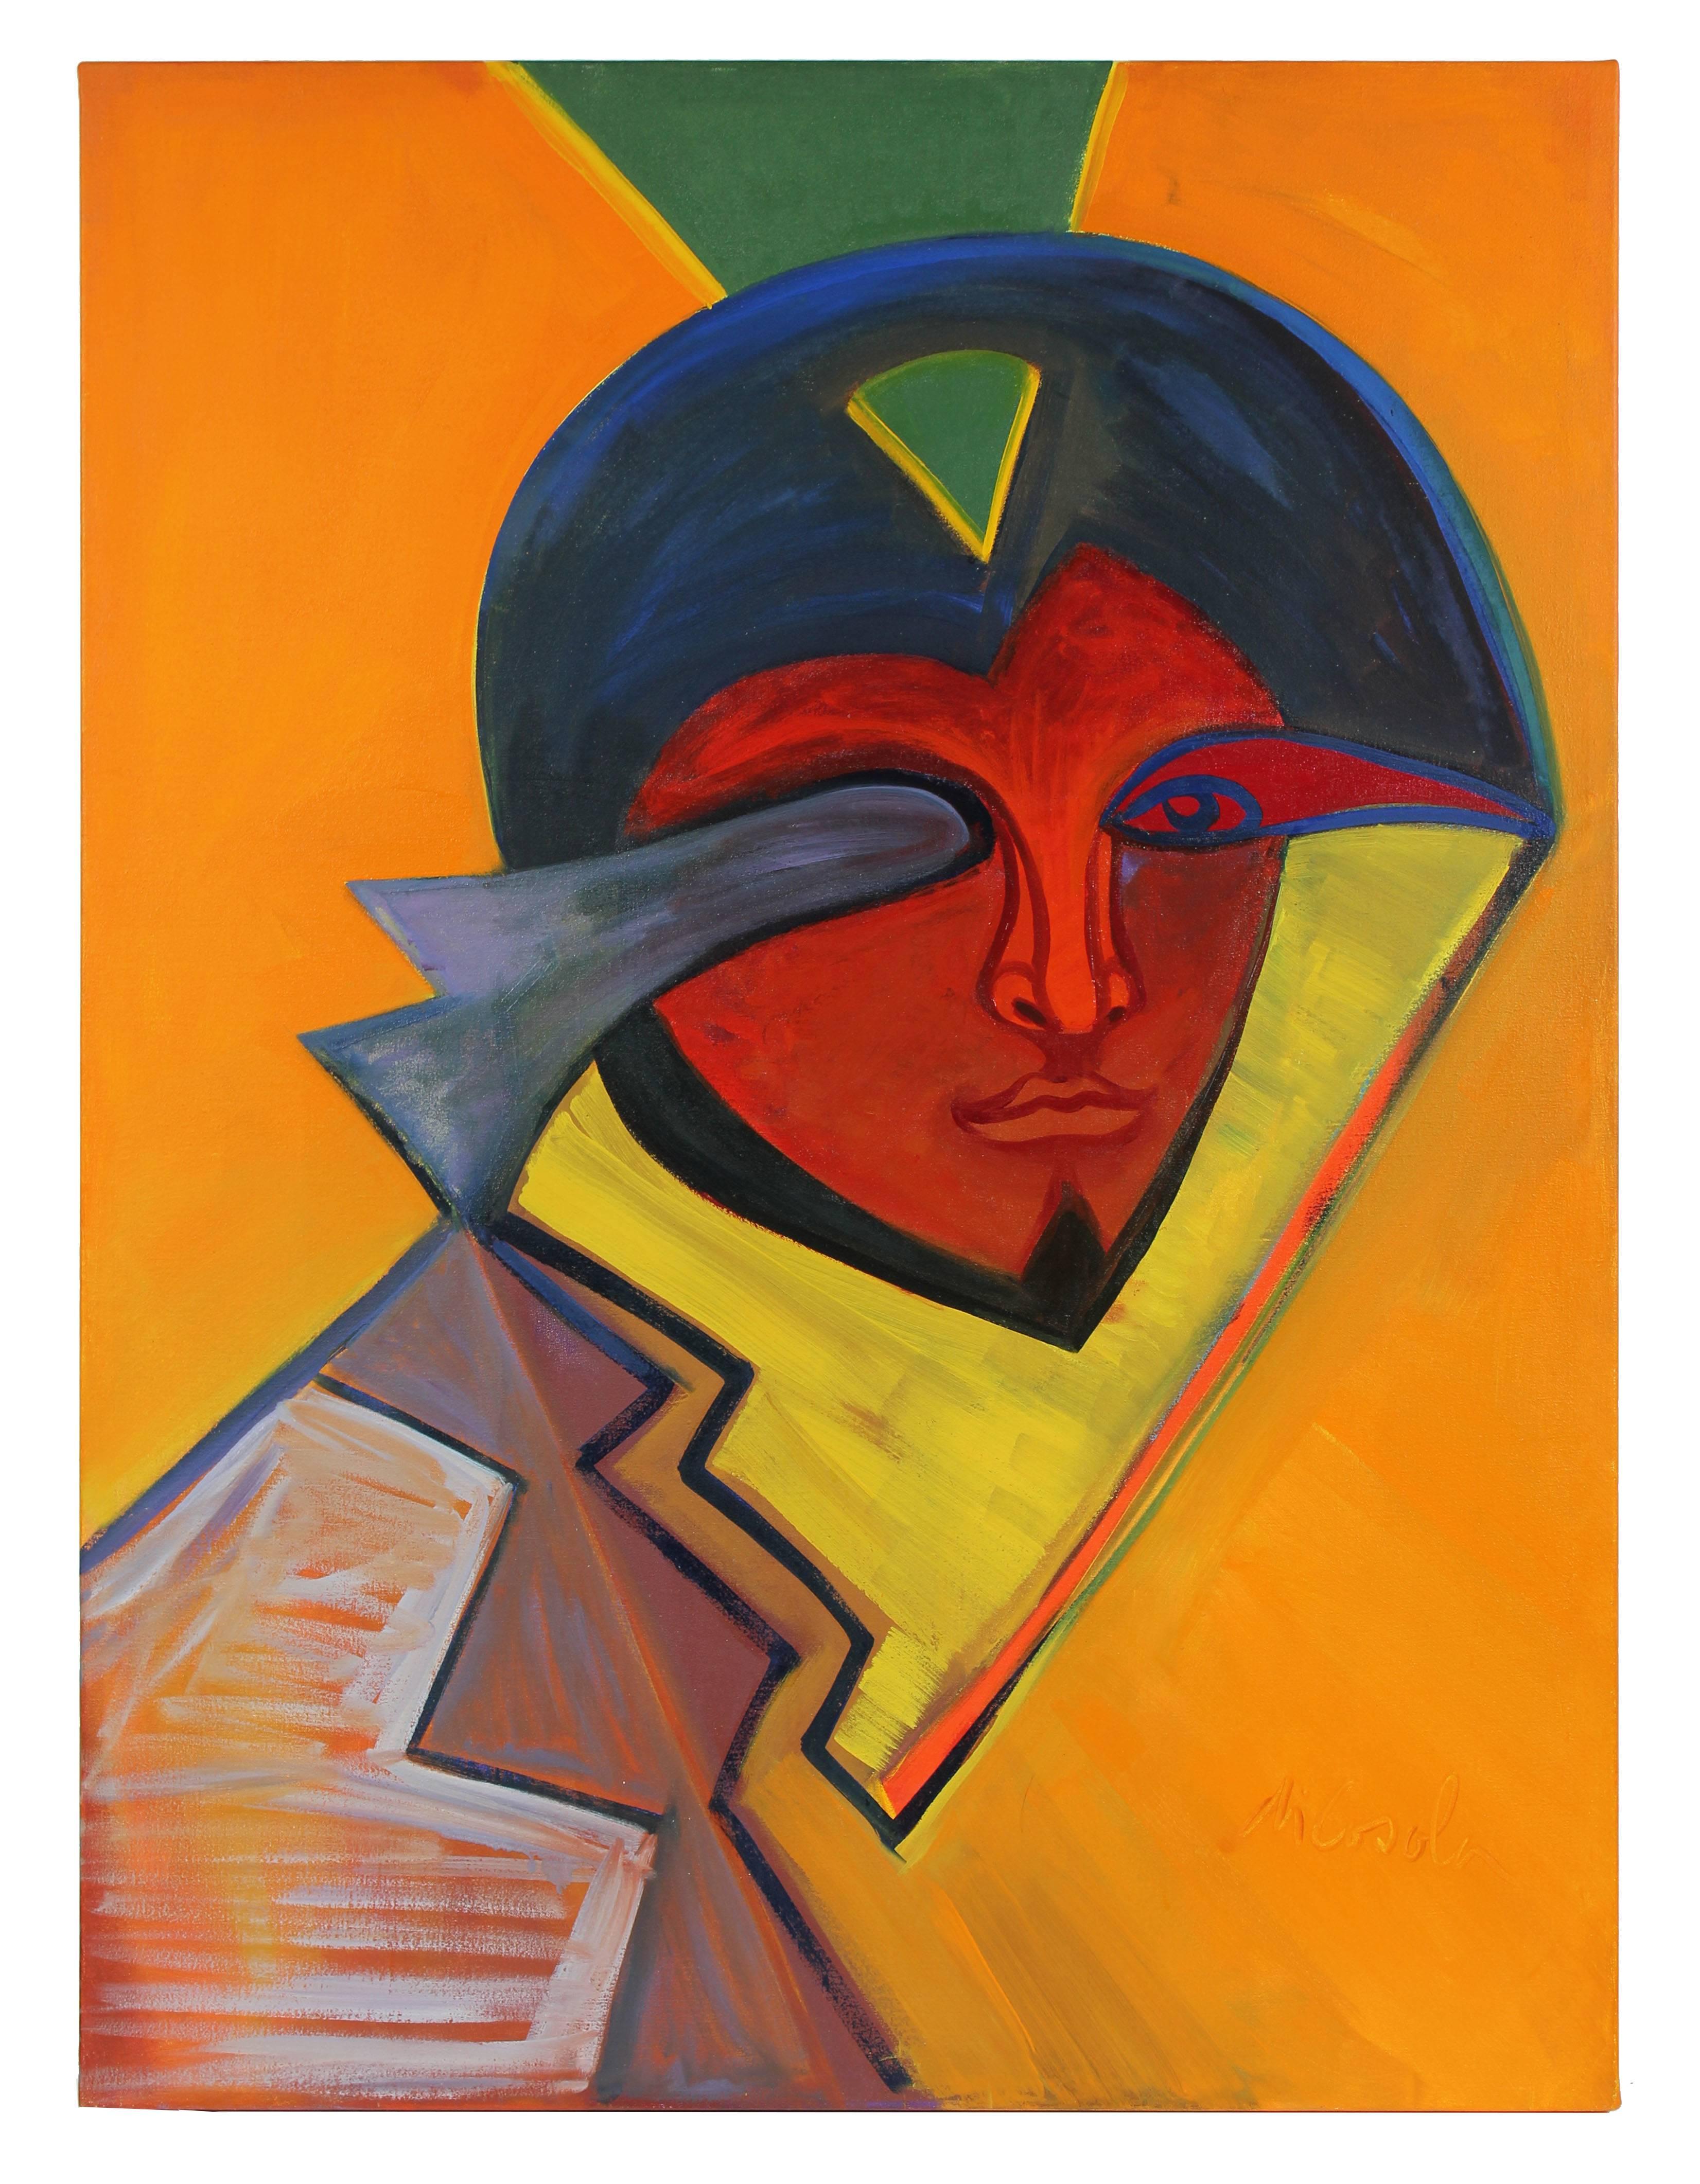 Michael di Cosola Abstract Painting - Large Colorful Abstracted Portrait in Oil on Canvas, 20th Century